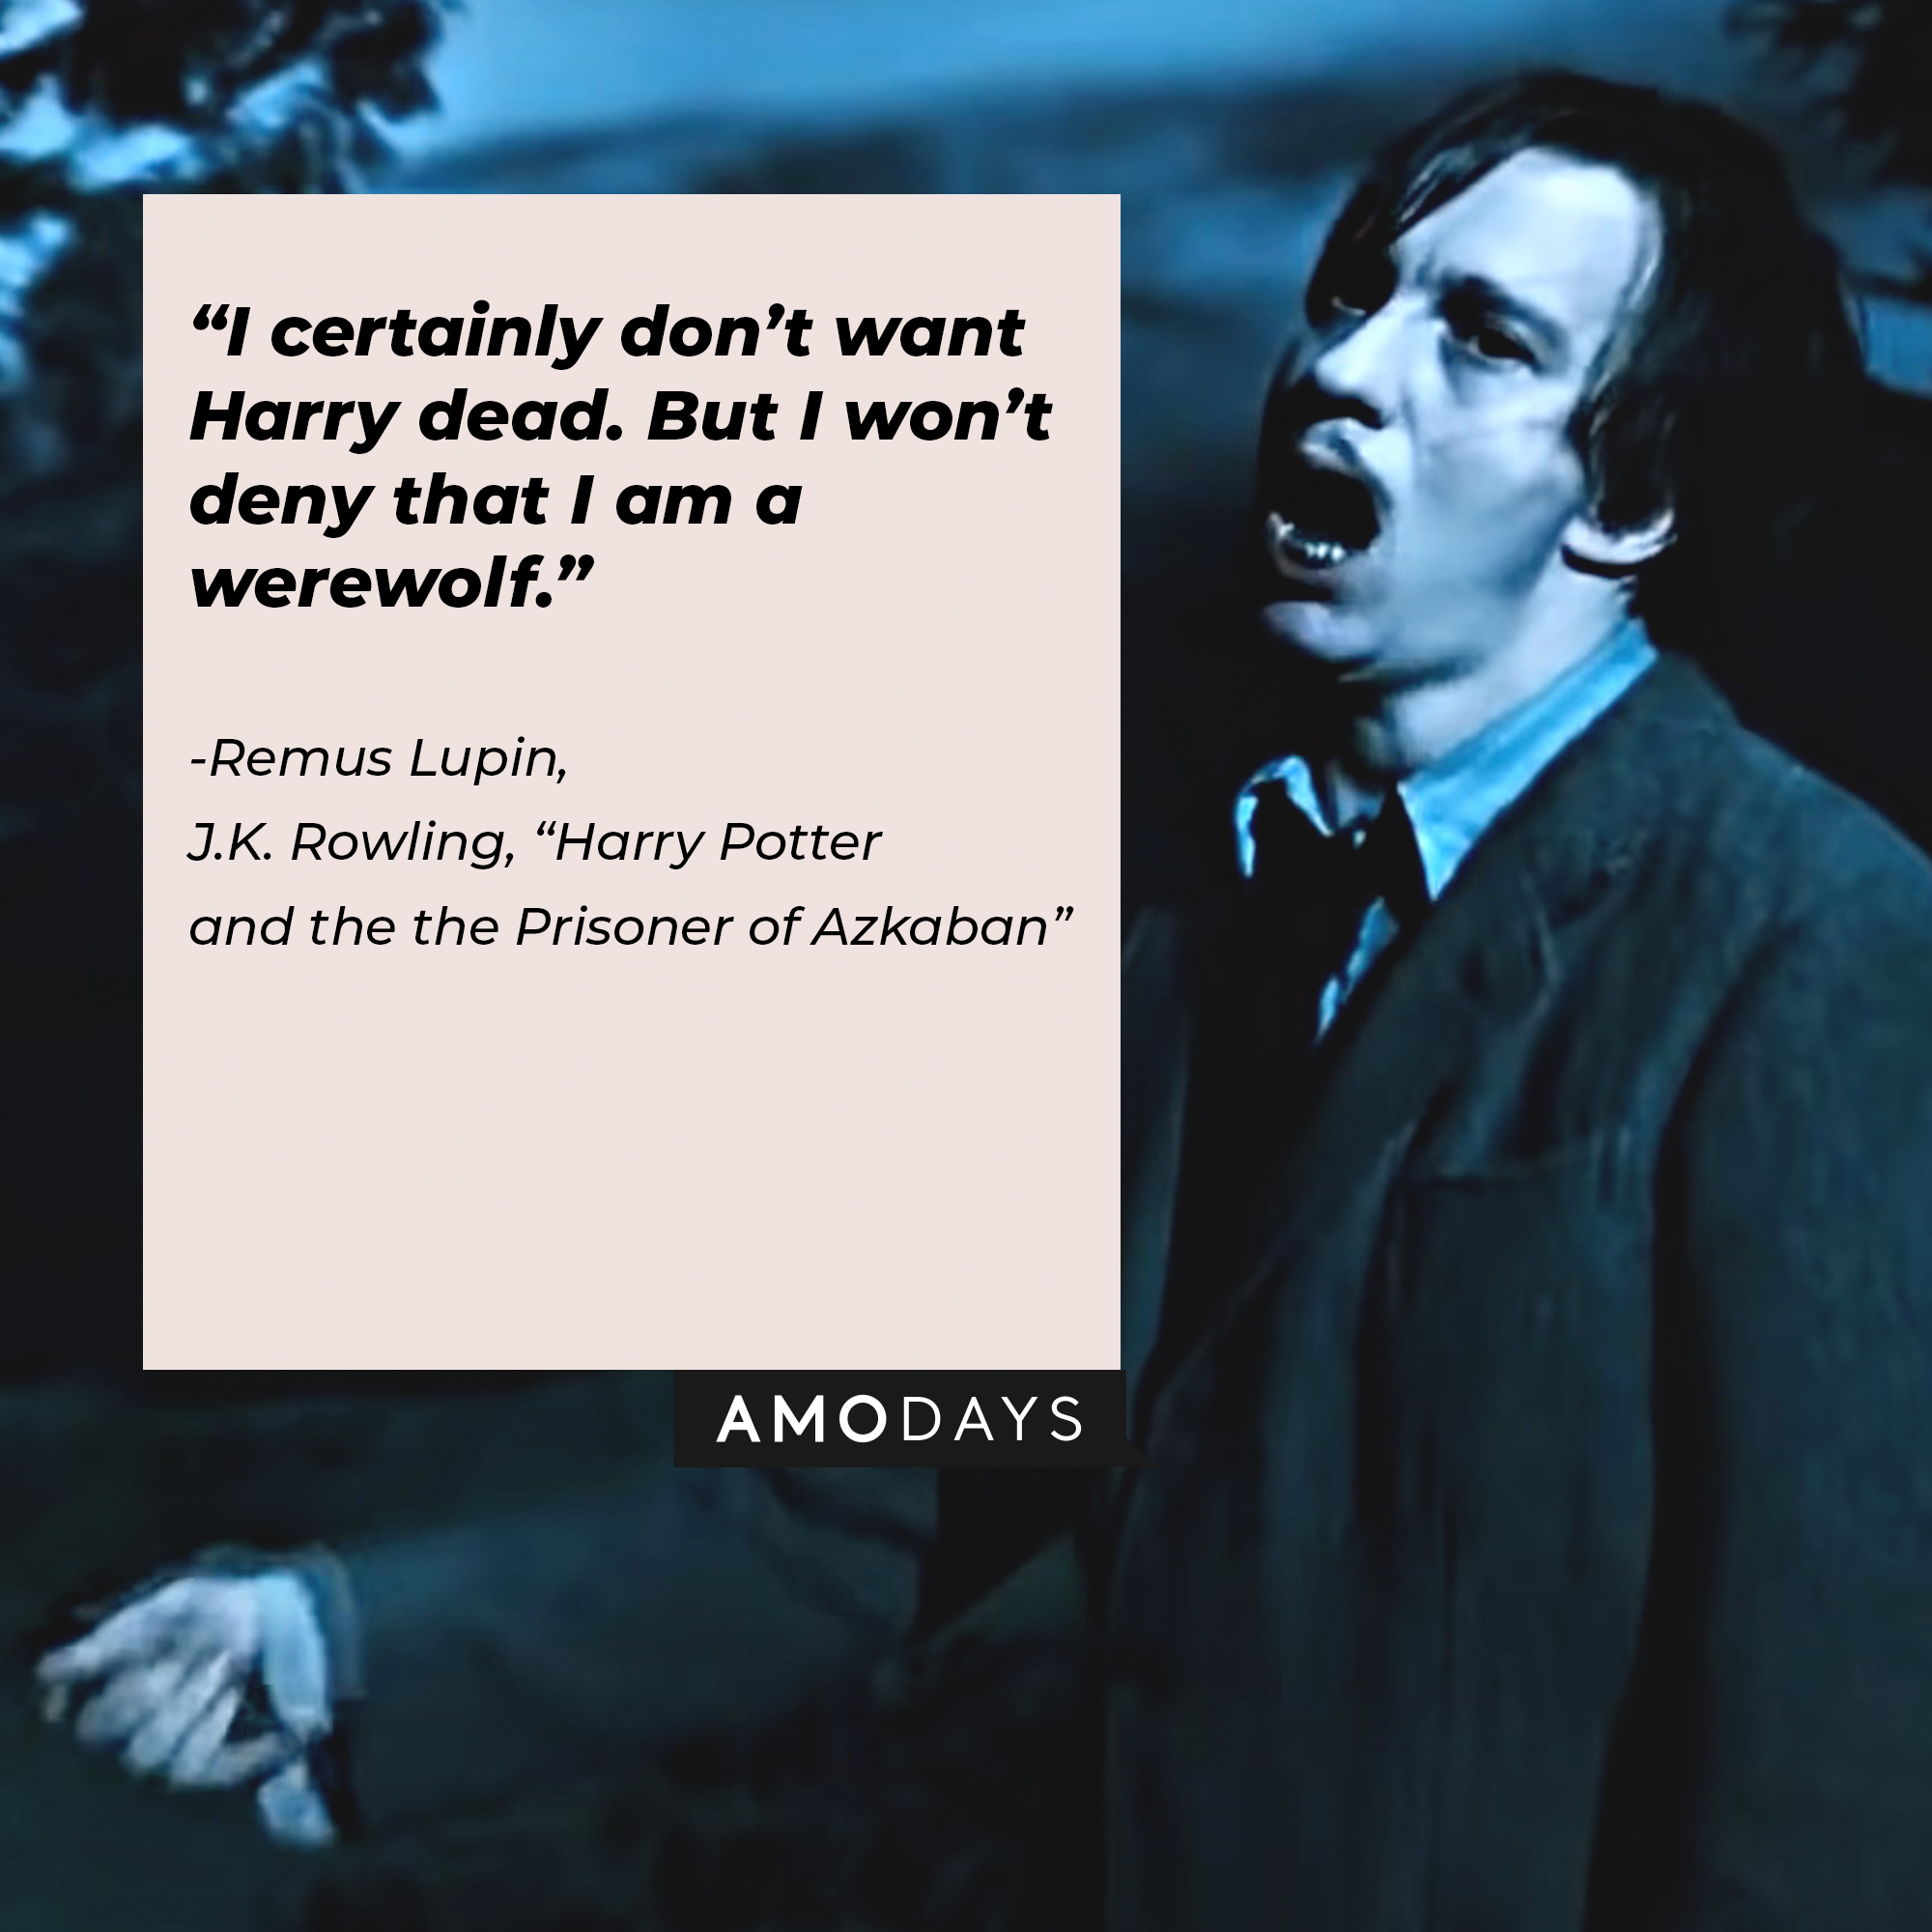 A picture of Remus Lupin turning into a werewolf with his quote: “I certainly don’t want Harry dead. But I won’t deny that I am a werewolf.” | Source: youtube.com/WarnerBrosPictures